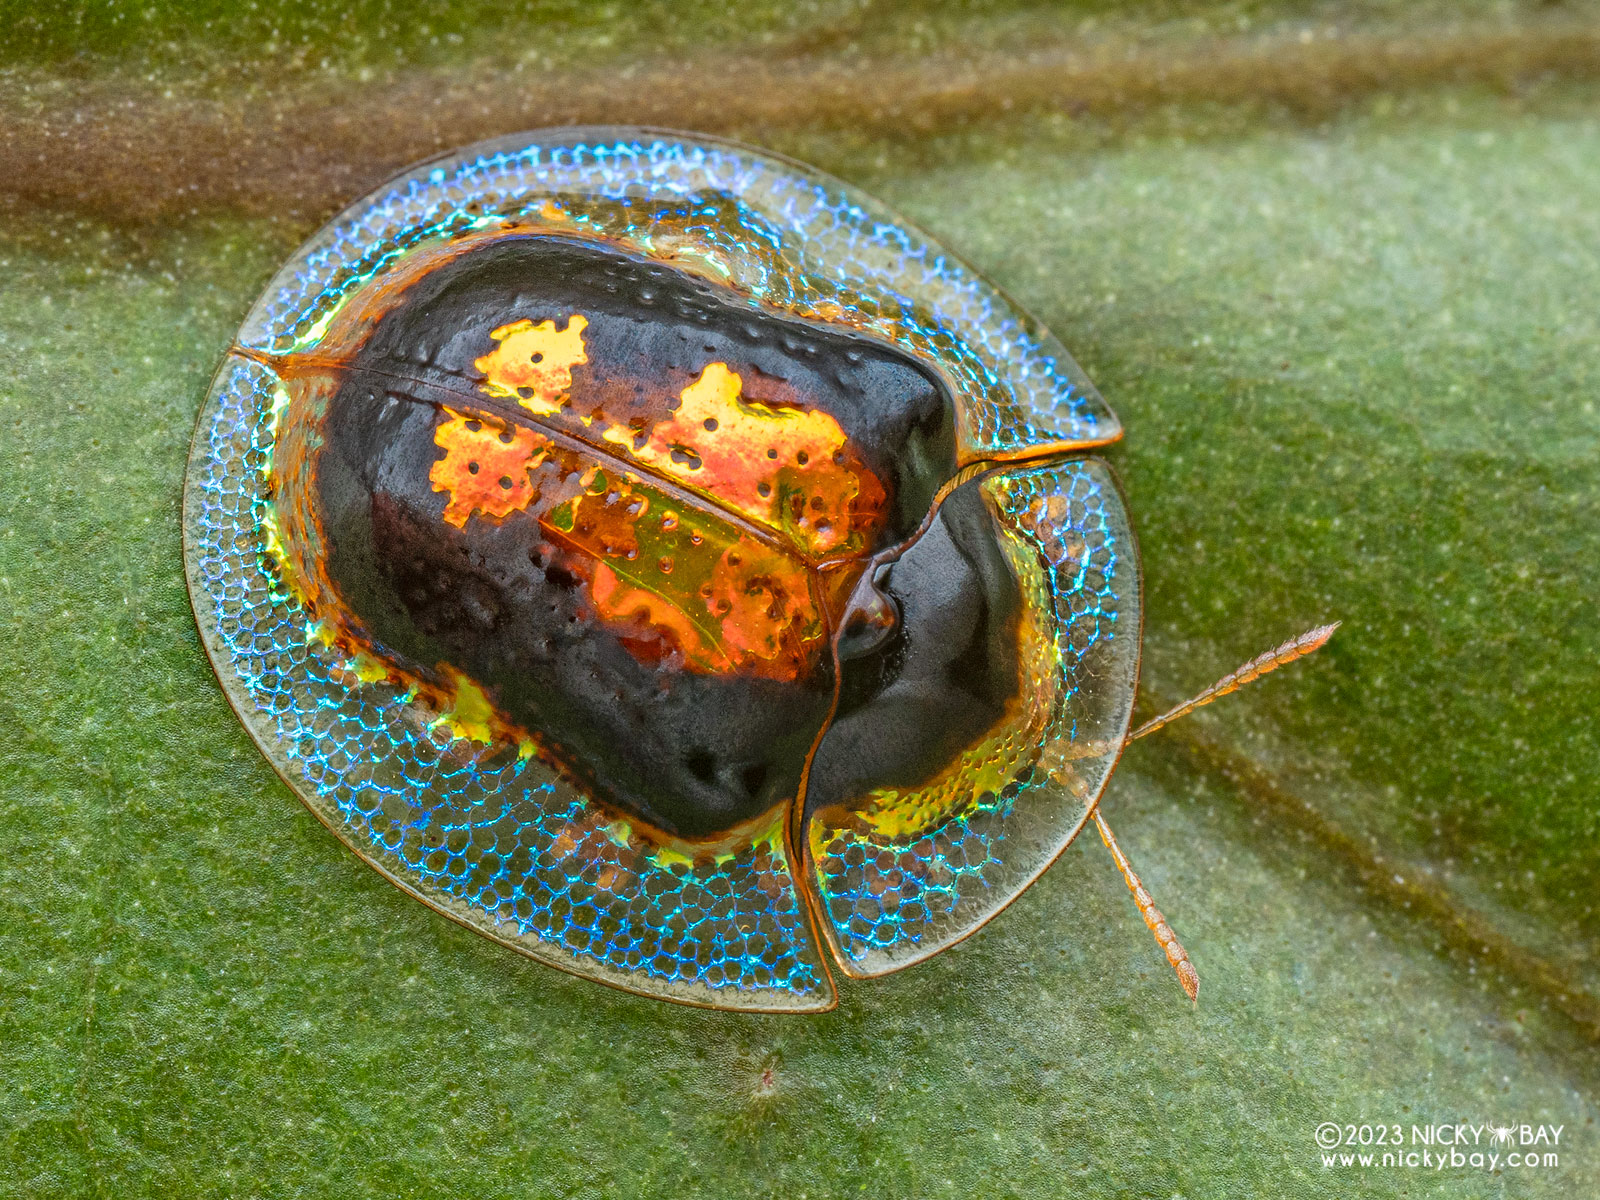 A photo of a beautiful tortoise beetle adult, with a gold and brown shell ringed with blue.